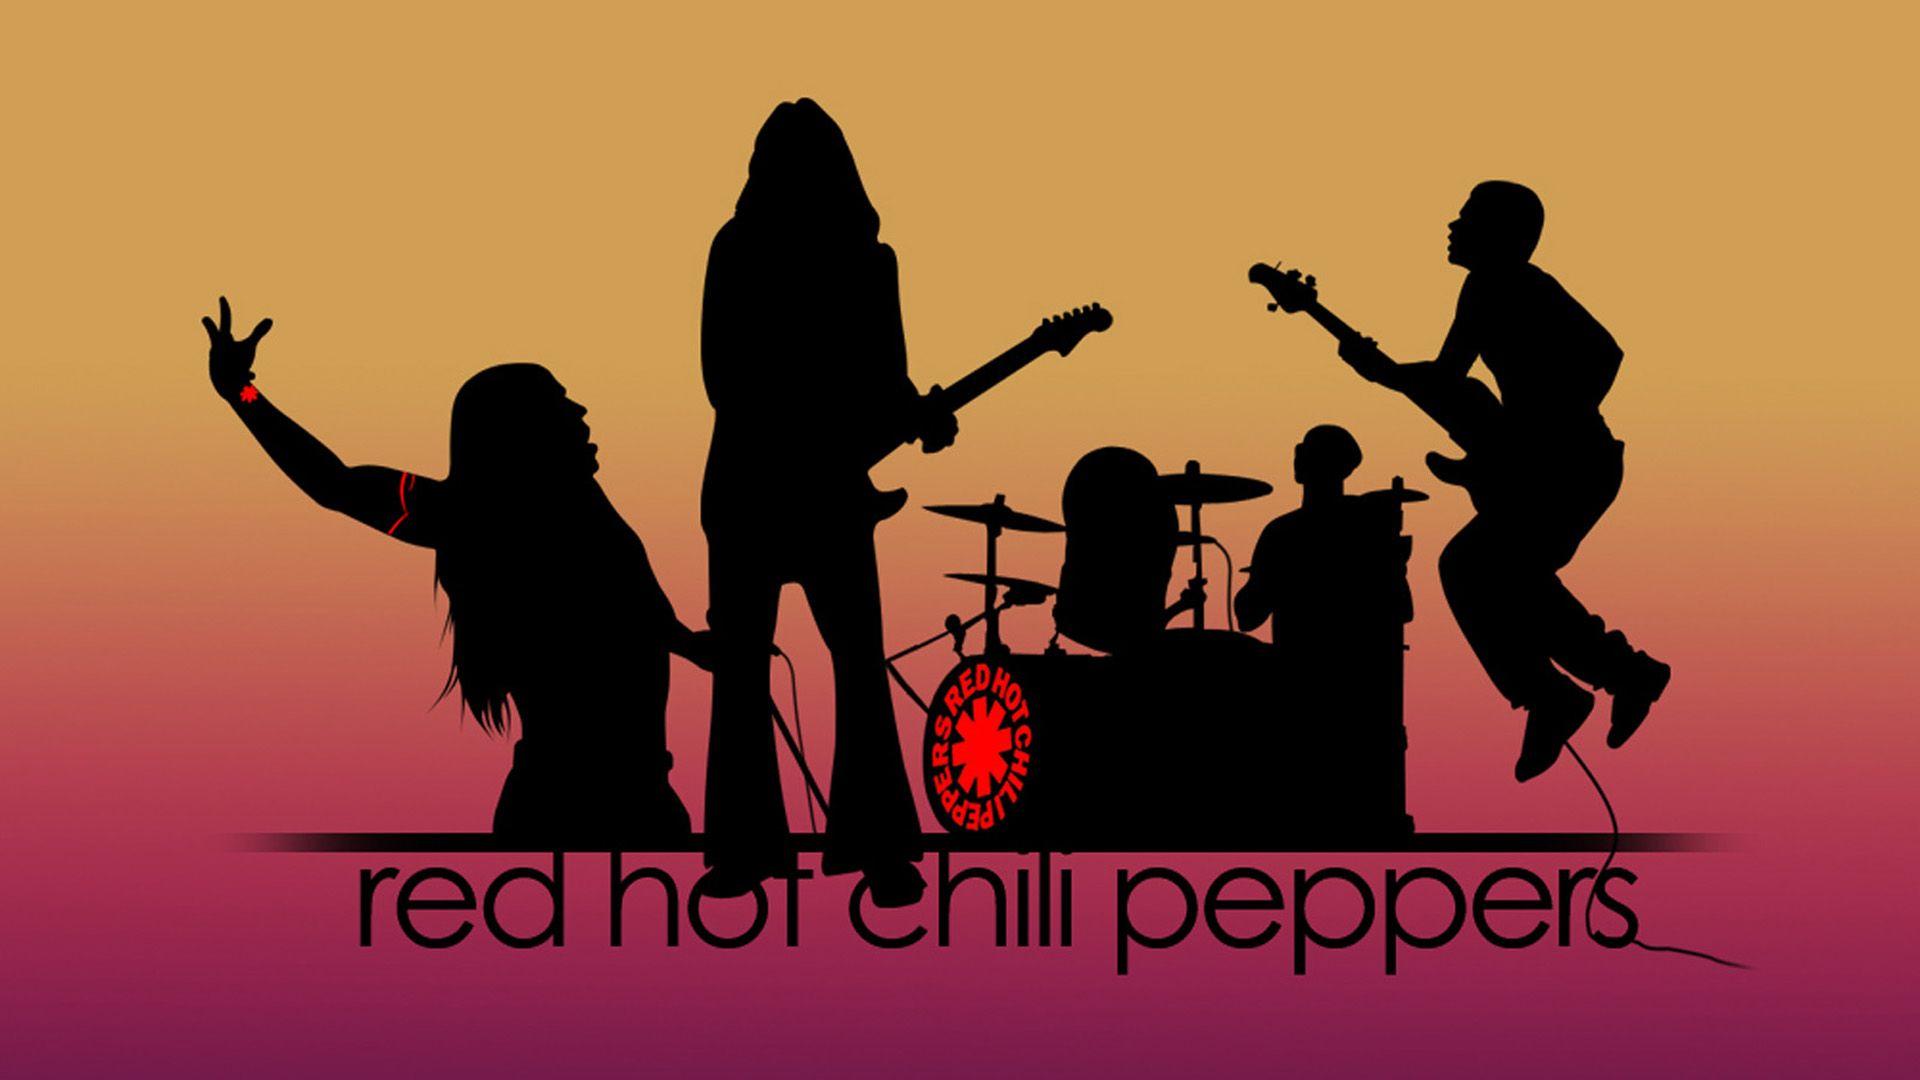 red hot chili peppers wallpaper HD